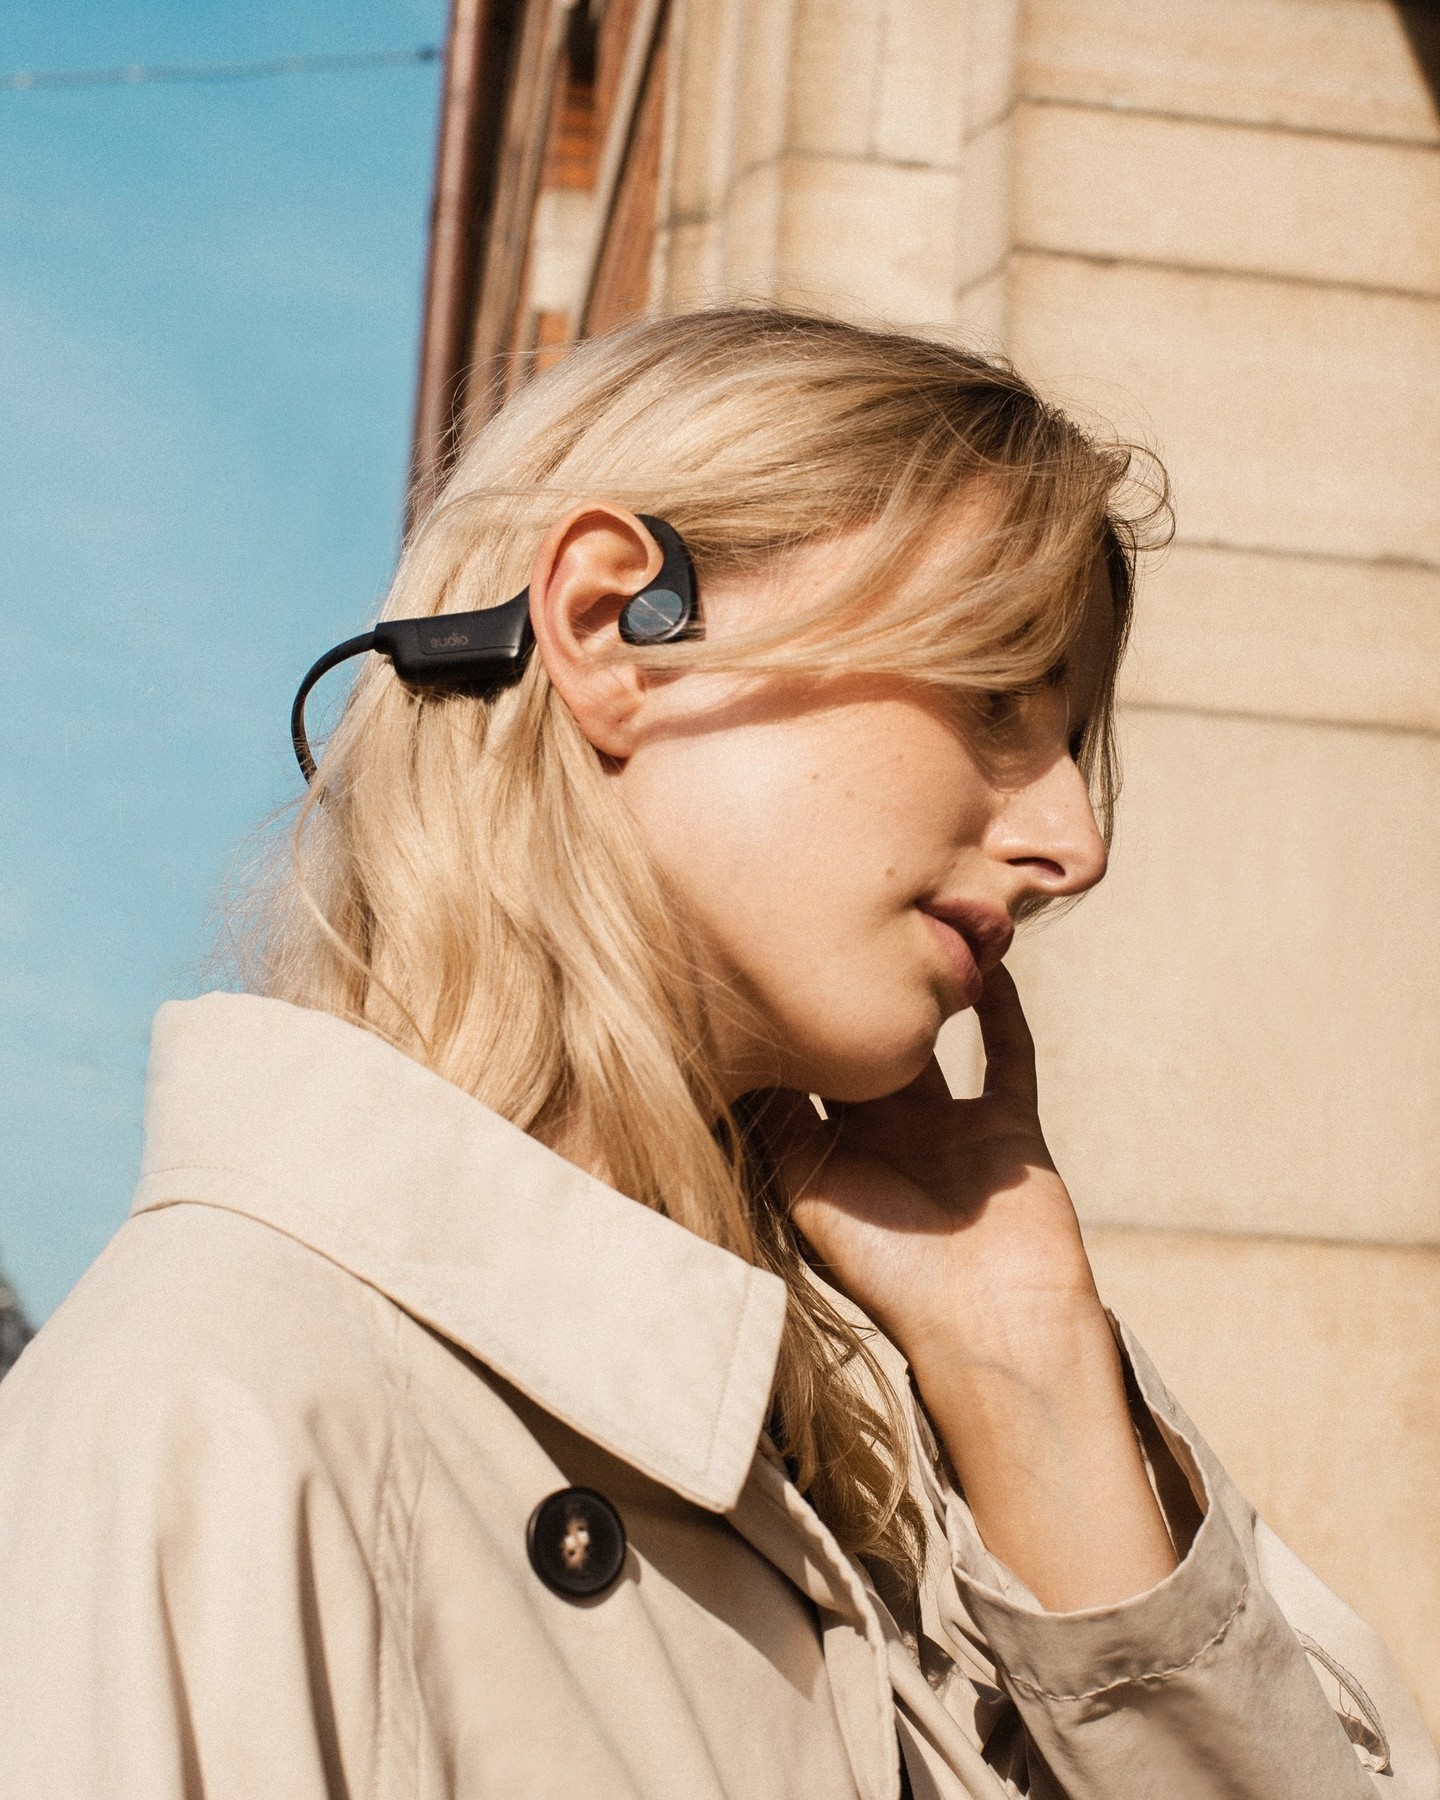 The Flex Fit Bone Conduction Headphones. Lightweight, easy to find in your bag, and up to 9hrs of playtime. Available now at sudio.com.⁠⁠#sudio #shapingsound #springishere #B2Black #B2White